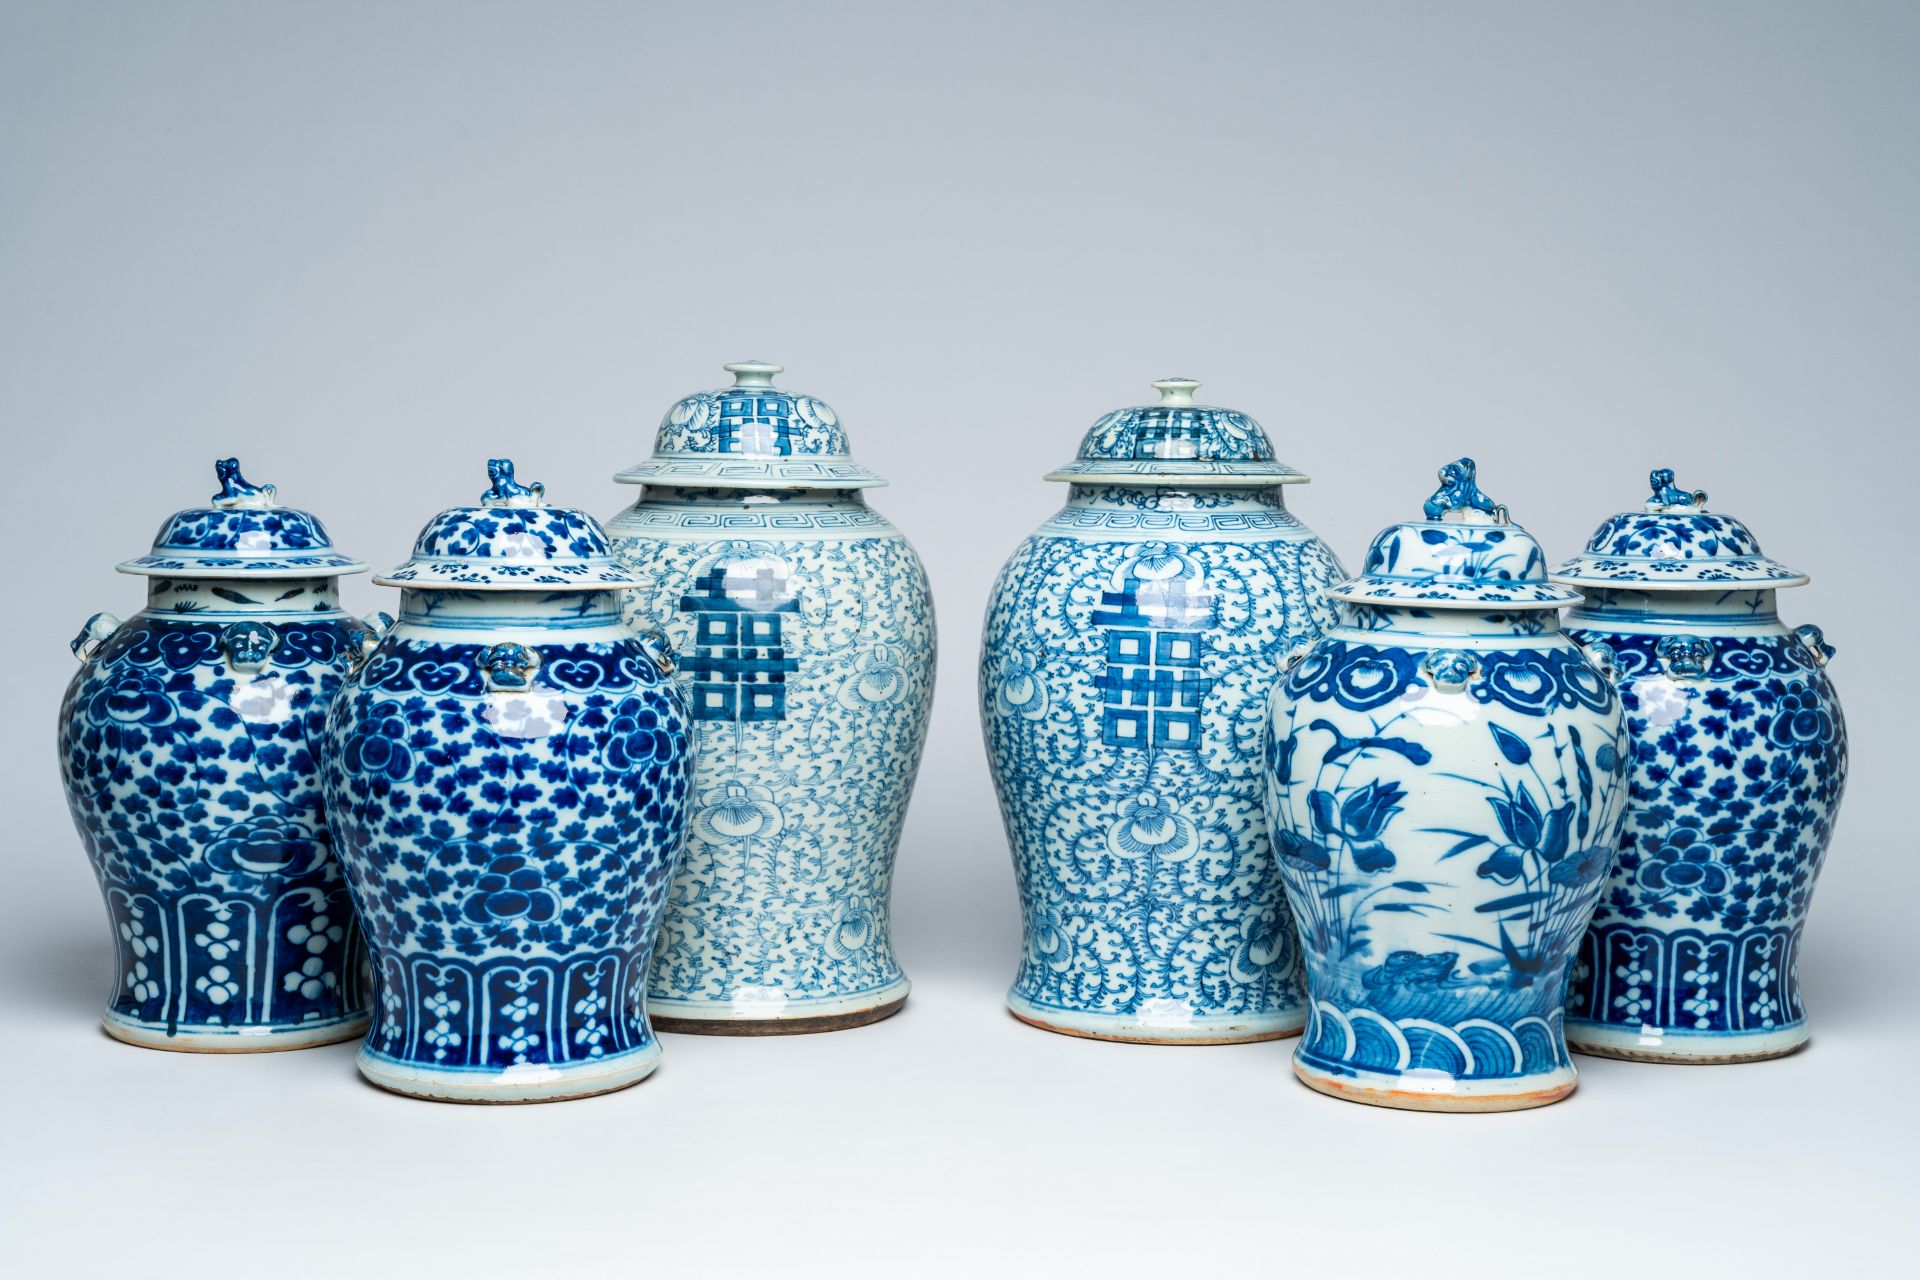 Six Chinese blue and white vases and covers with 'double happiness' and floral design, 19th/20th C.